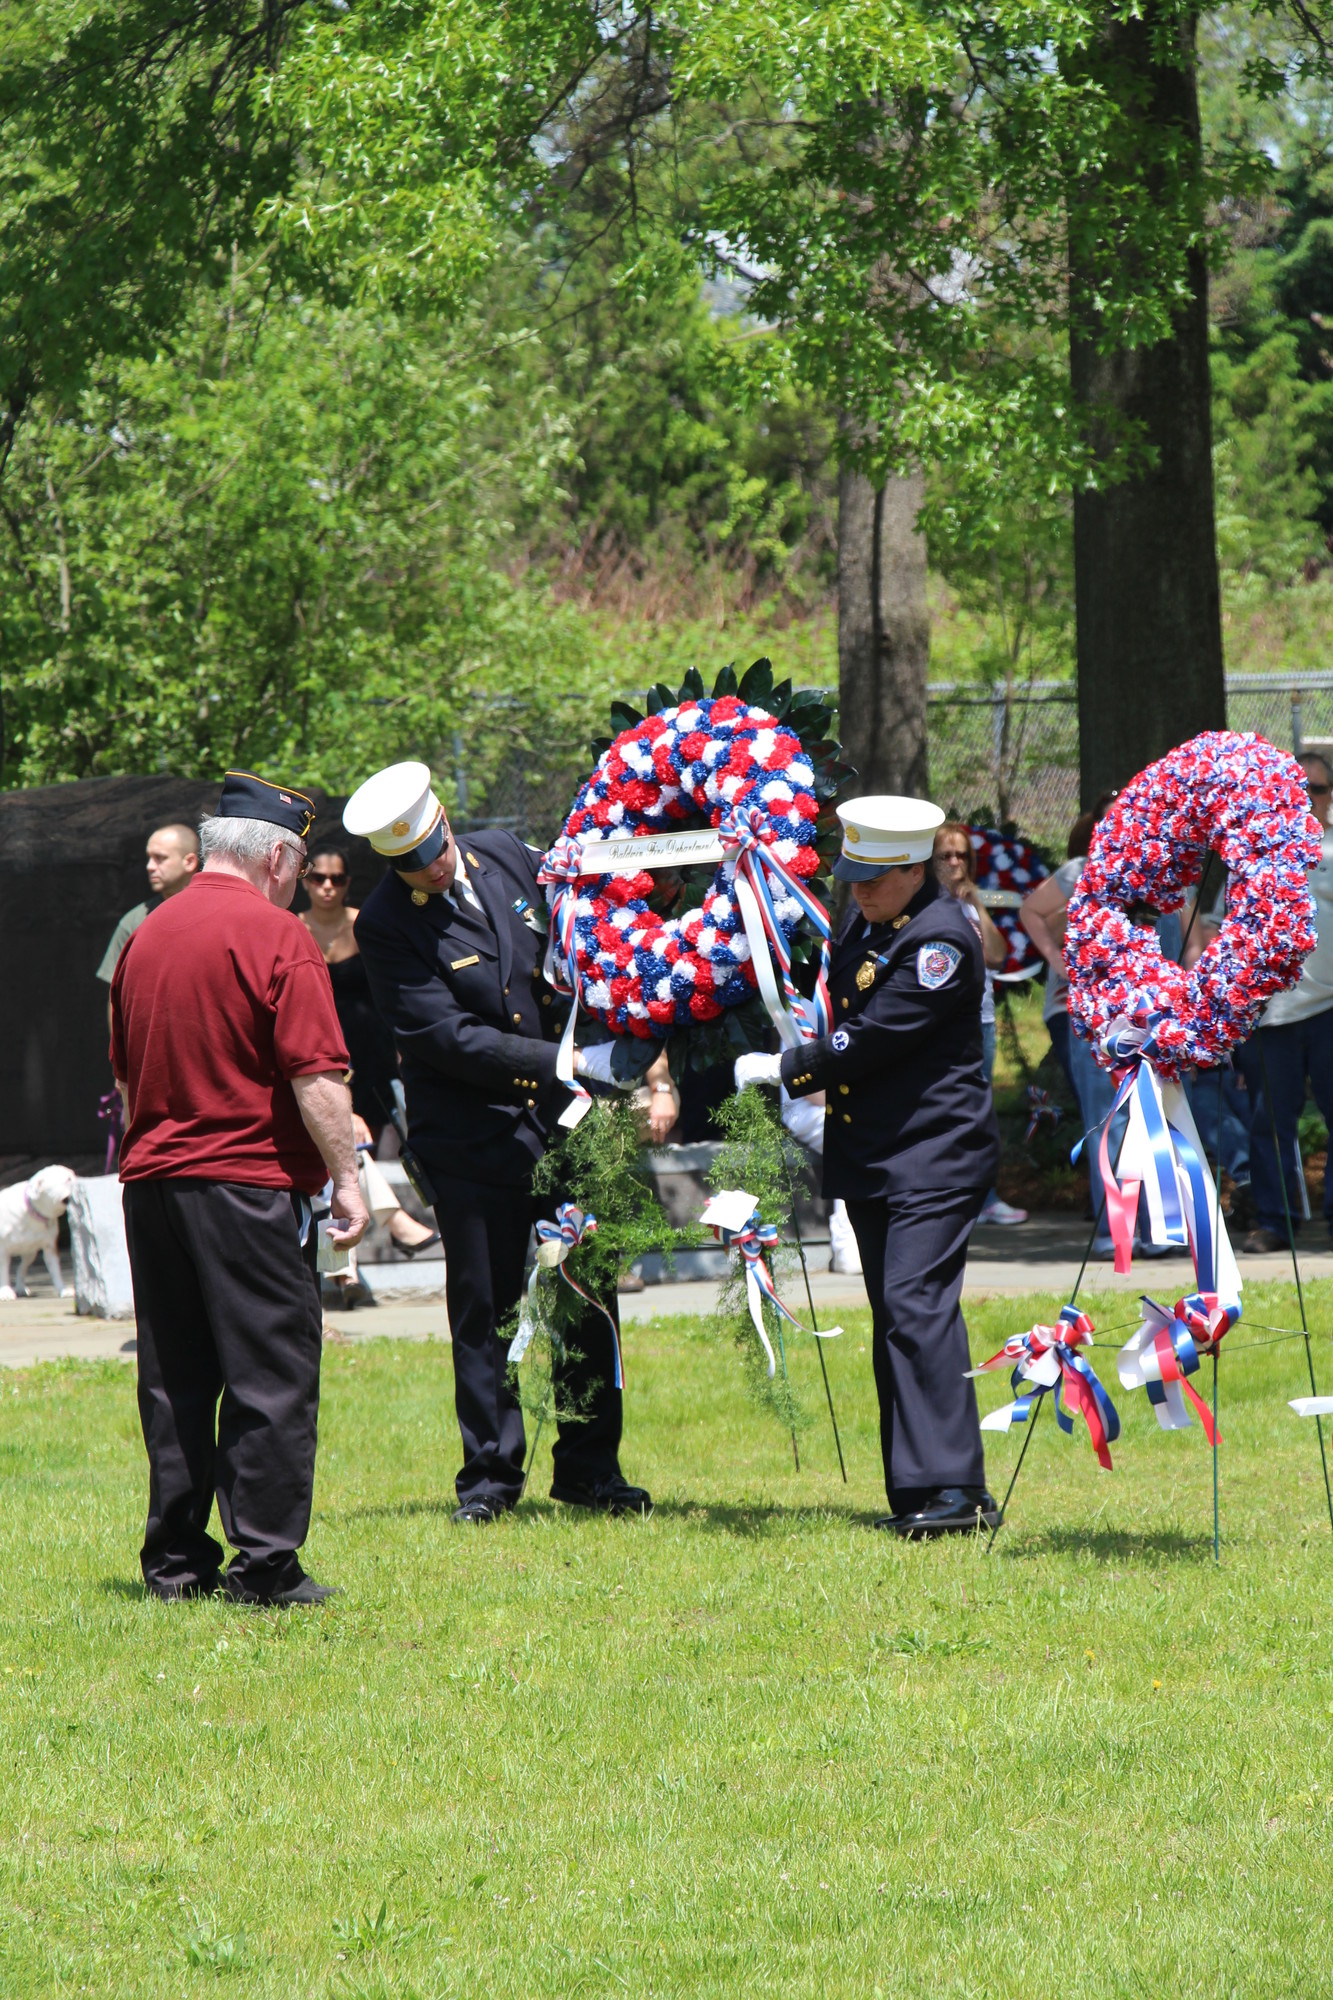 Chief Craig Yanantuono, of the Baldwin Fire Department, and 1st Deputy Chief Karen Bendel laid a wreath at the Memorial Day ceremony.